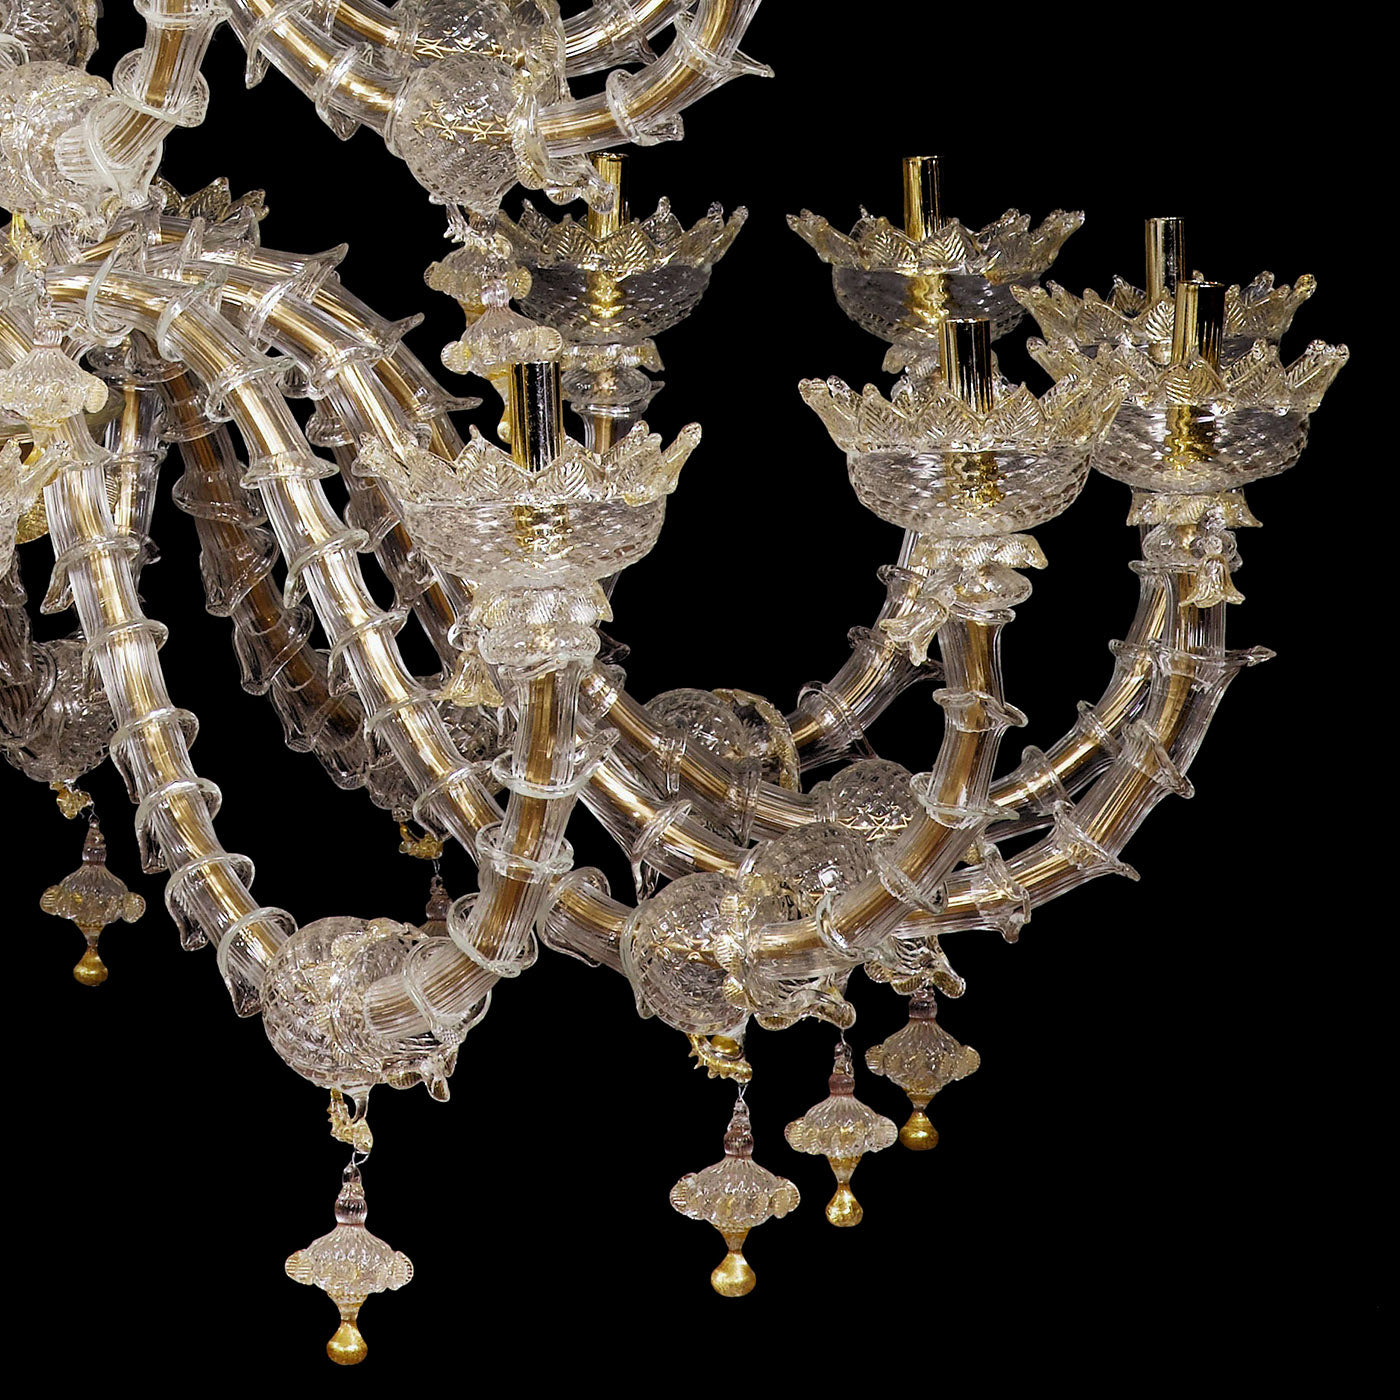 Rezzonico-style Gold and Crystal Chandelier #2 - Alternative view 3